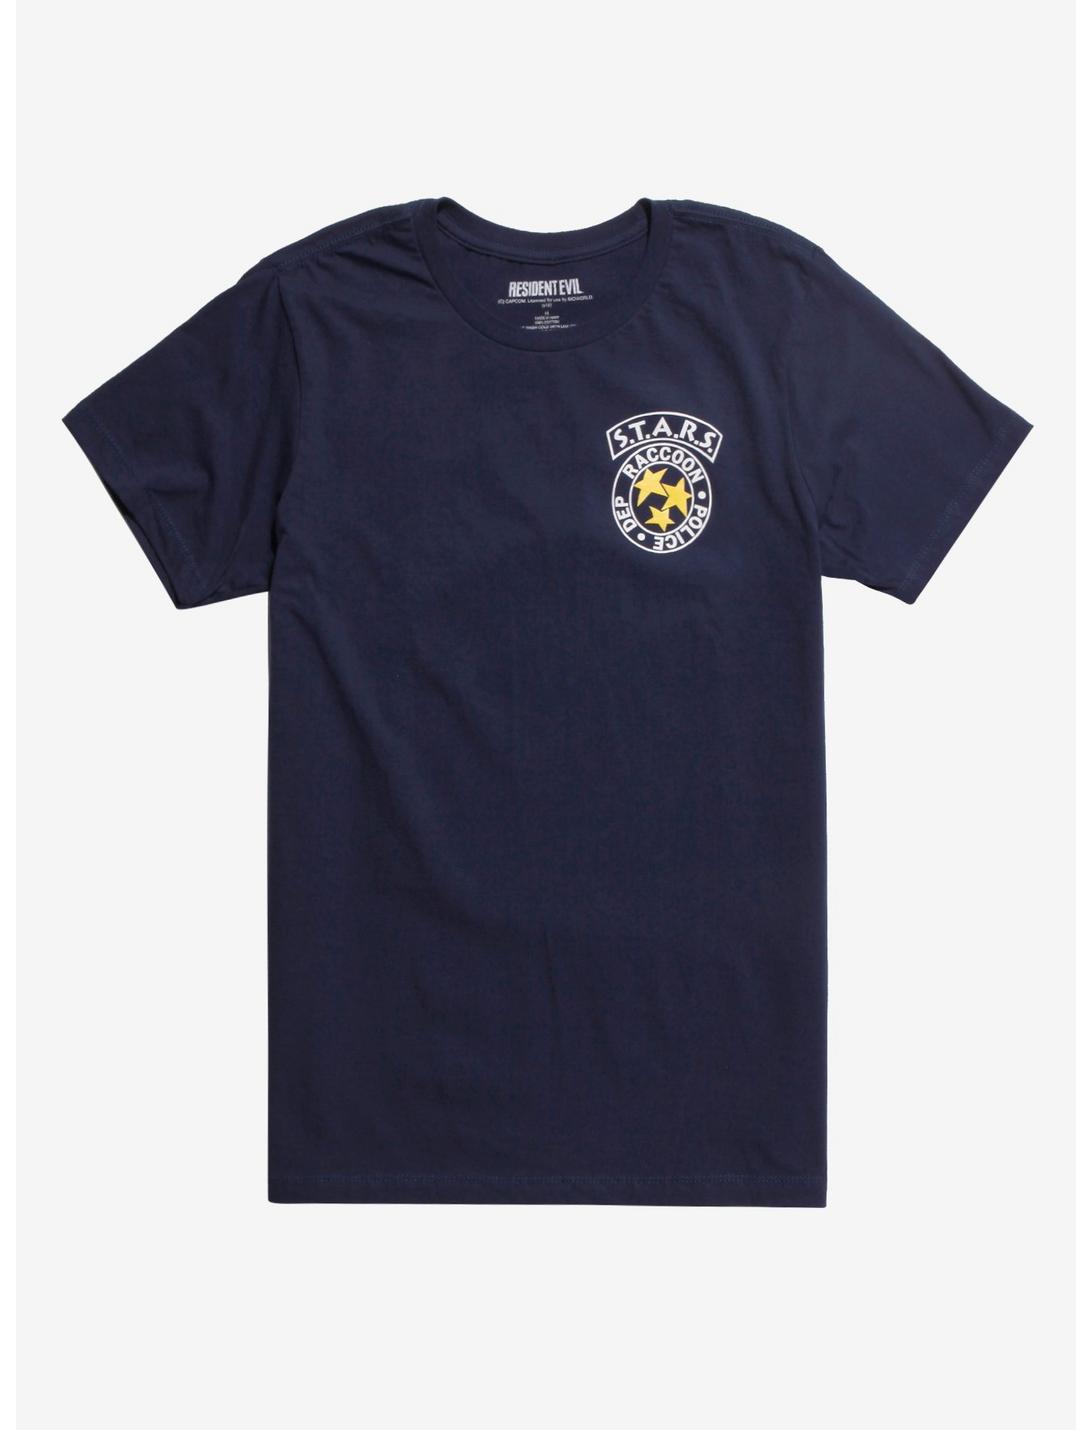 Resident Evil 2 S.T.A.R.S. Raccoon Police T-Shirt, MULTI, hi-res